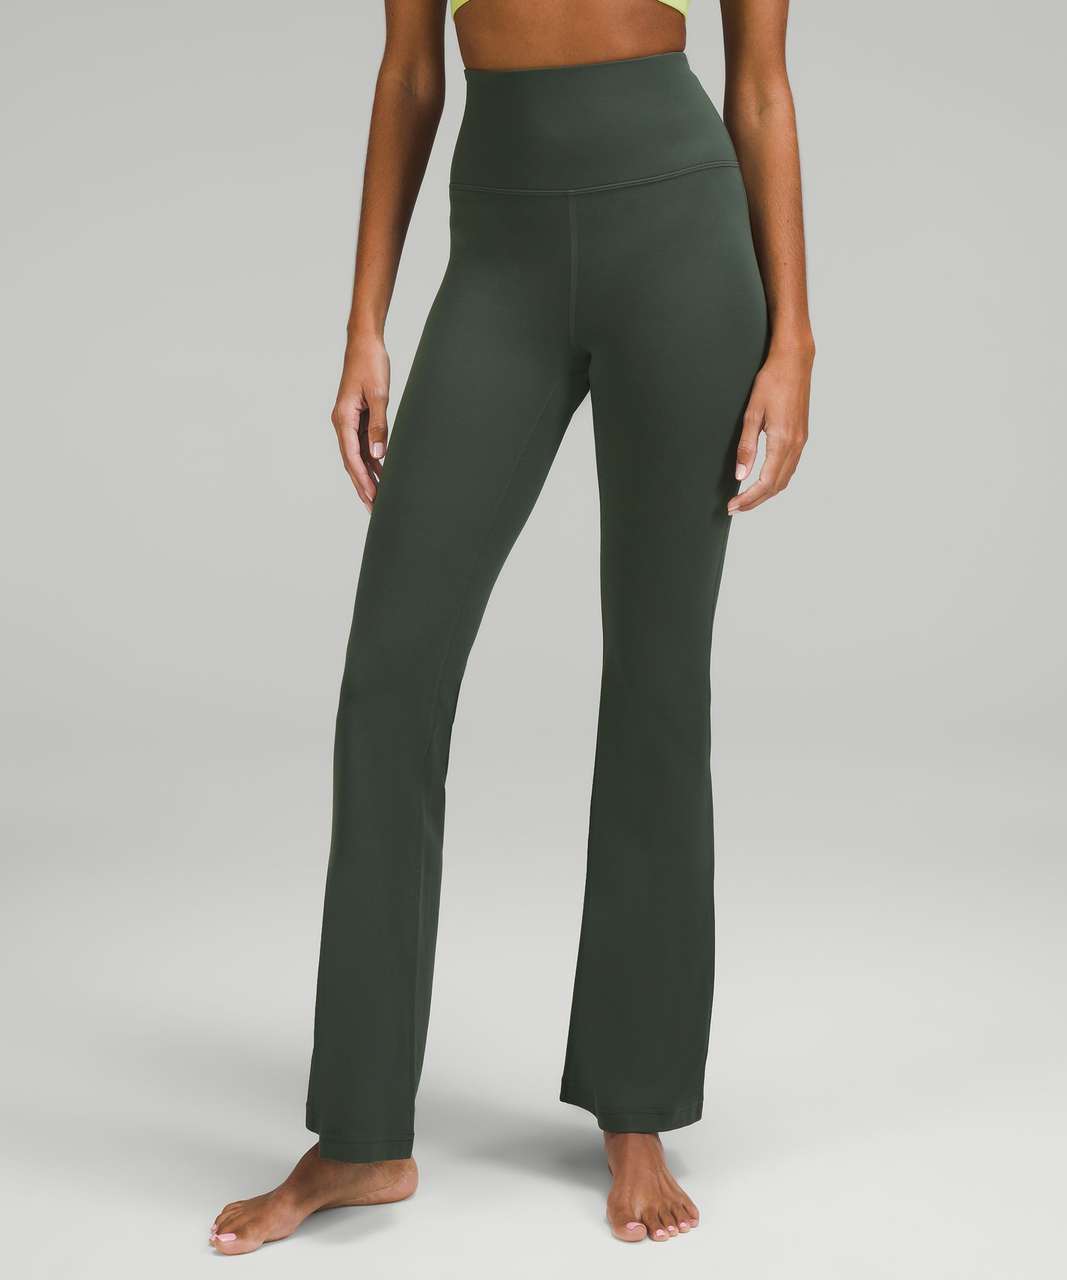 Lululemon Groove Super-High-Rise Flared Pant *Nulu - Smoked Spruce